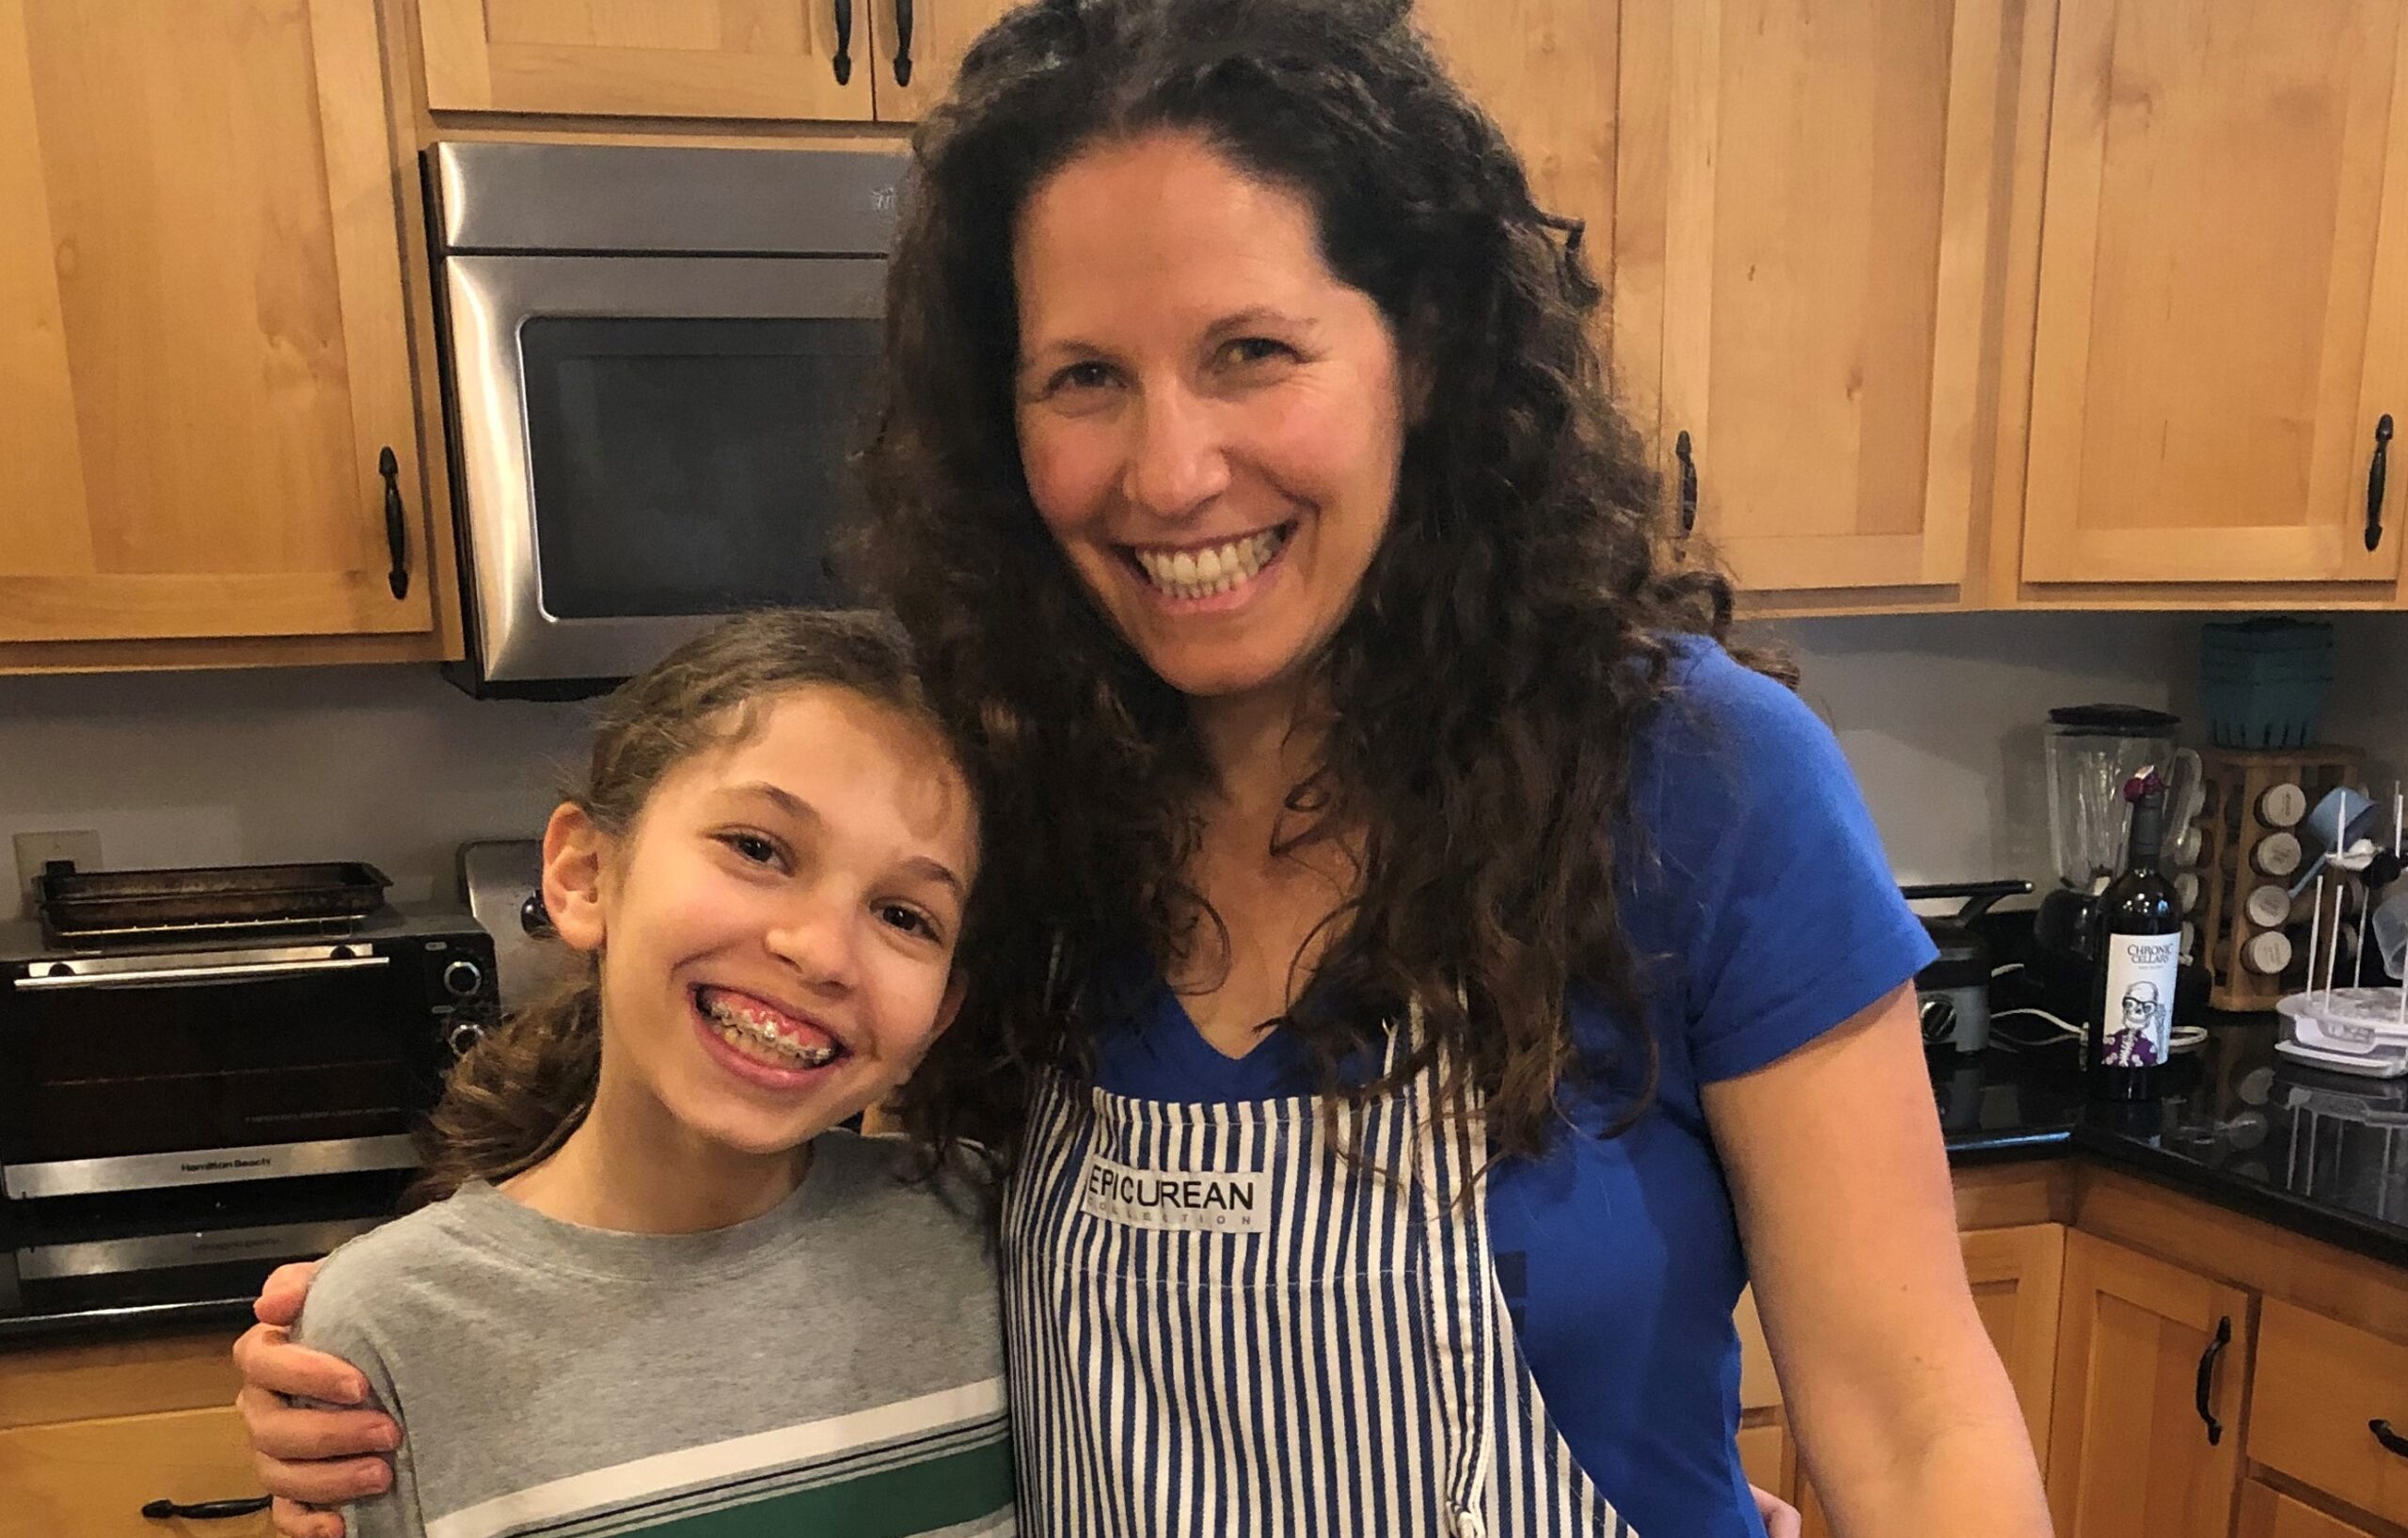 A woman and girl in the kitchen smiling for a picture.